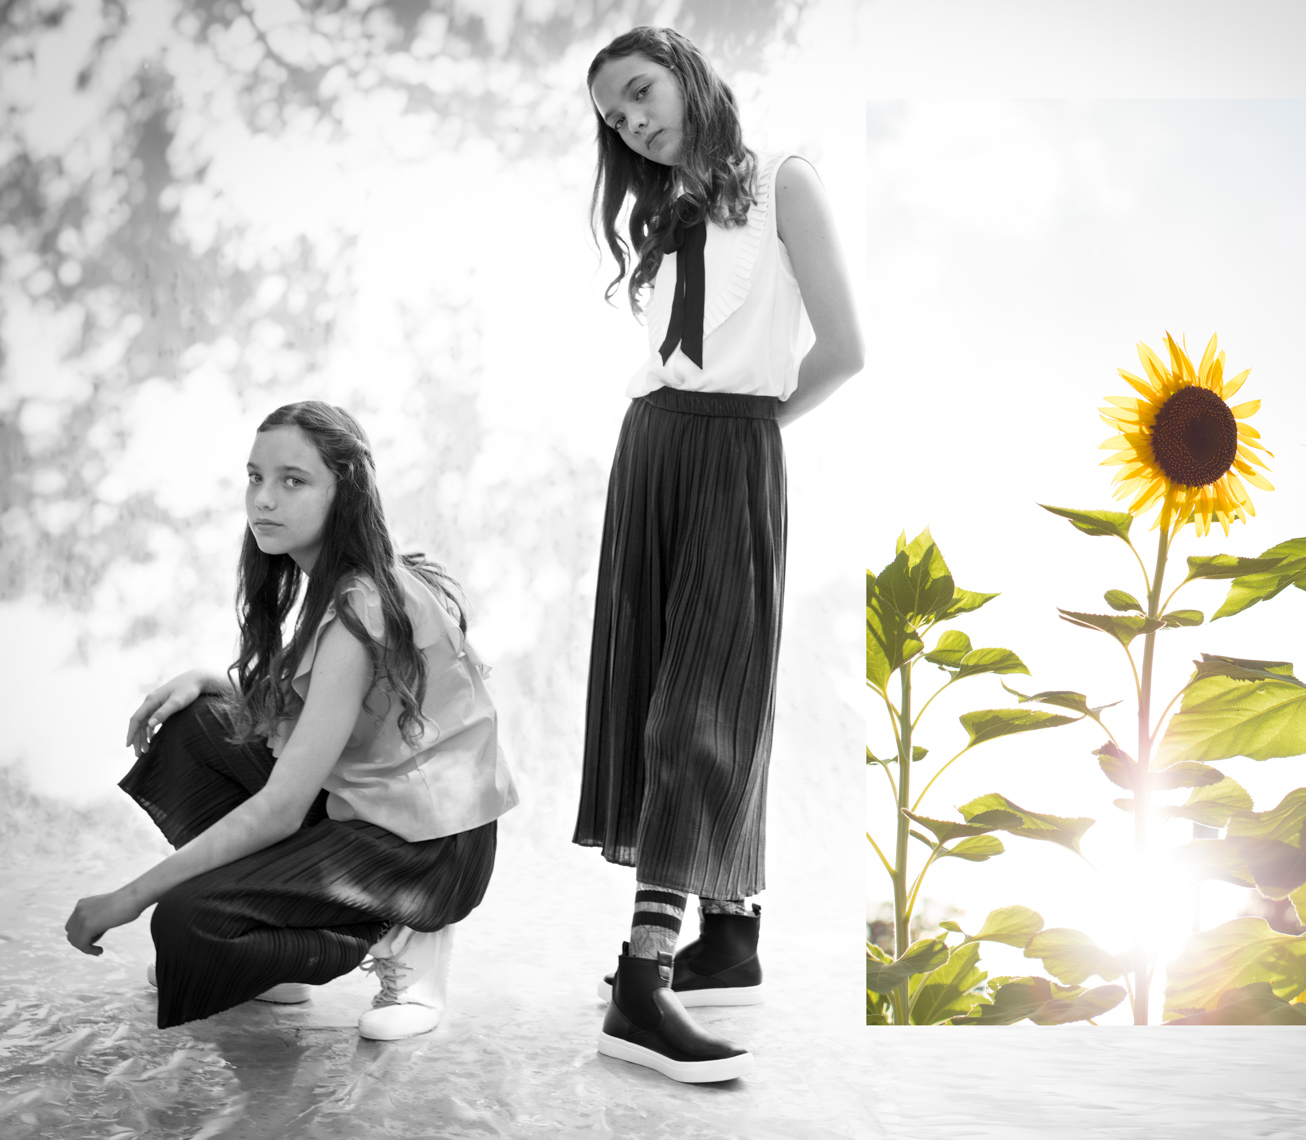  Black and White with Sunflowers | Editorial Fashion Photographer